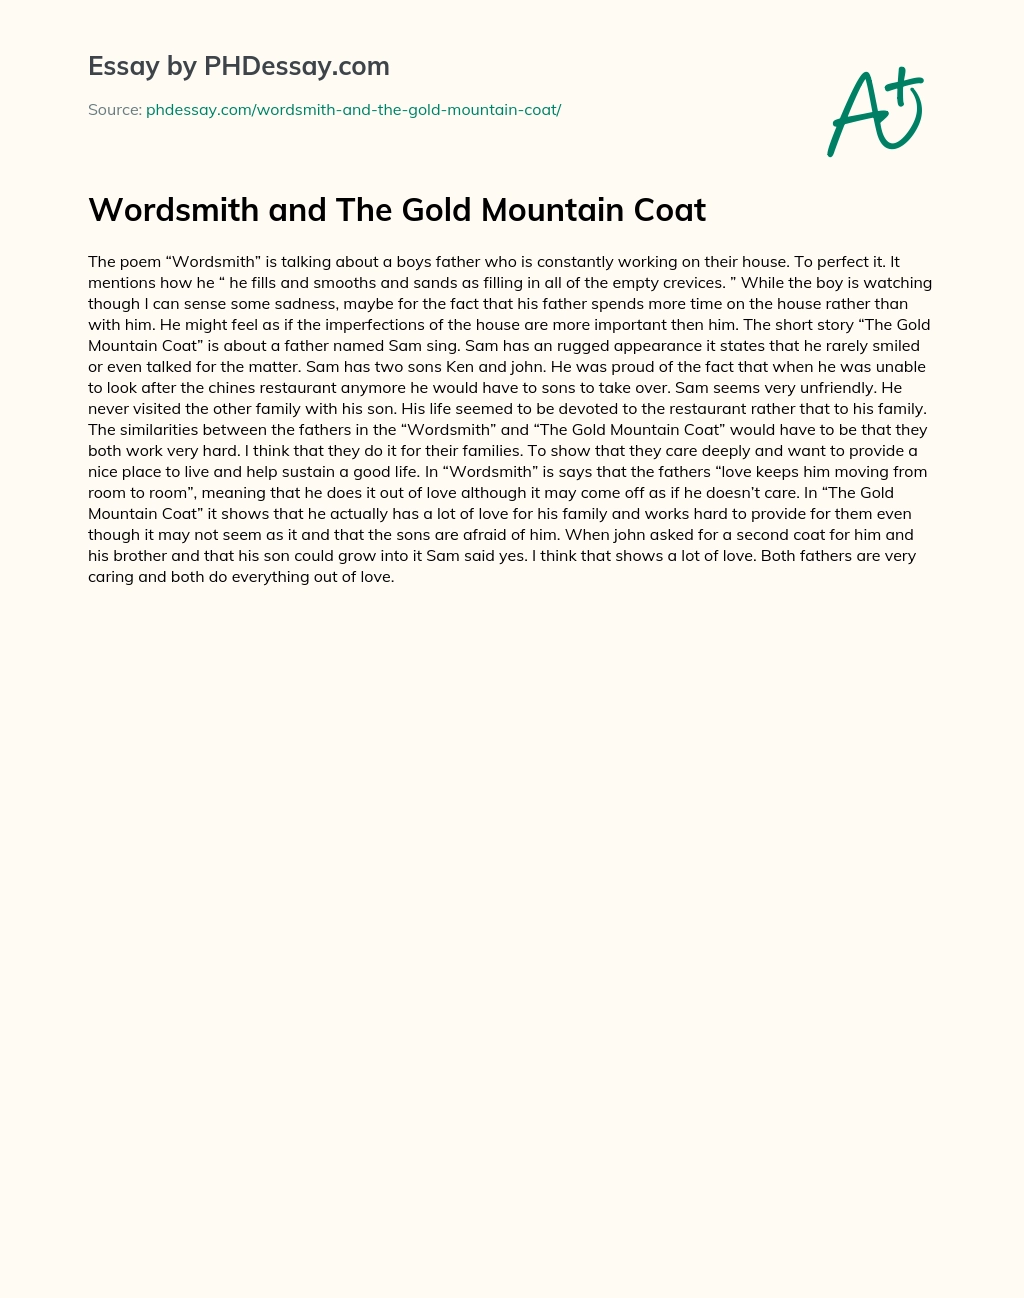 Wordsmith and The Gold Mountain Coat essay